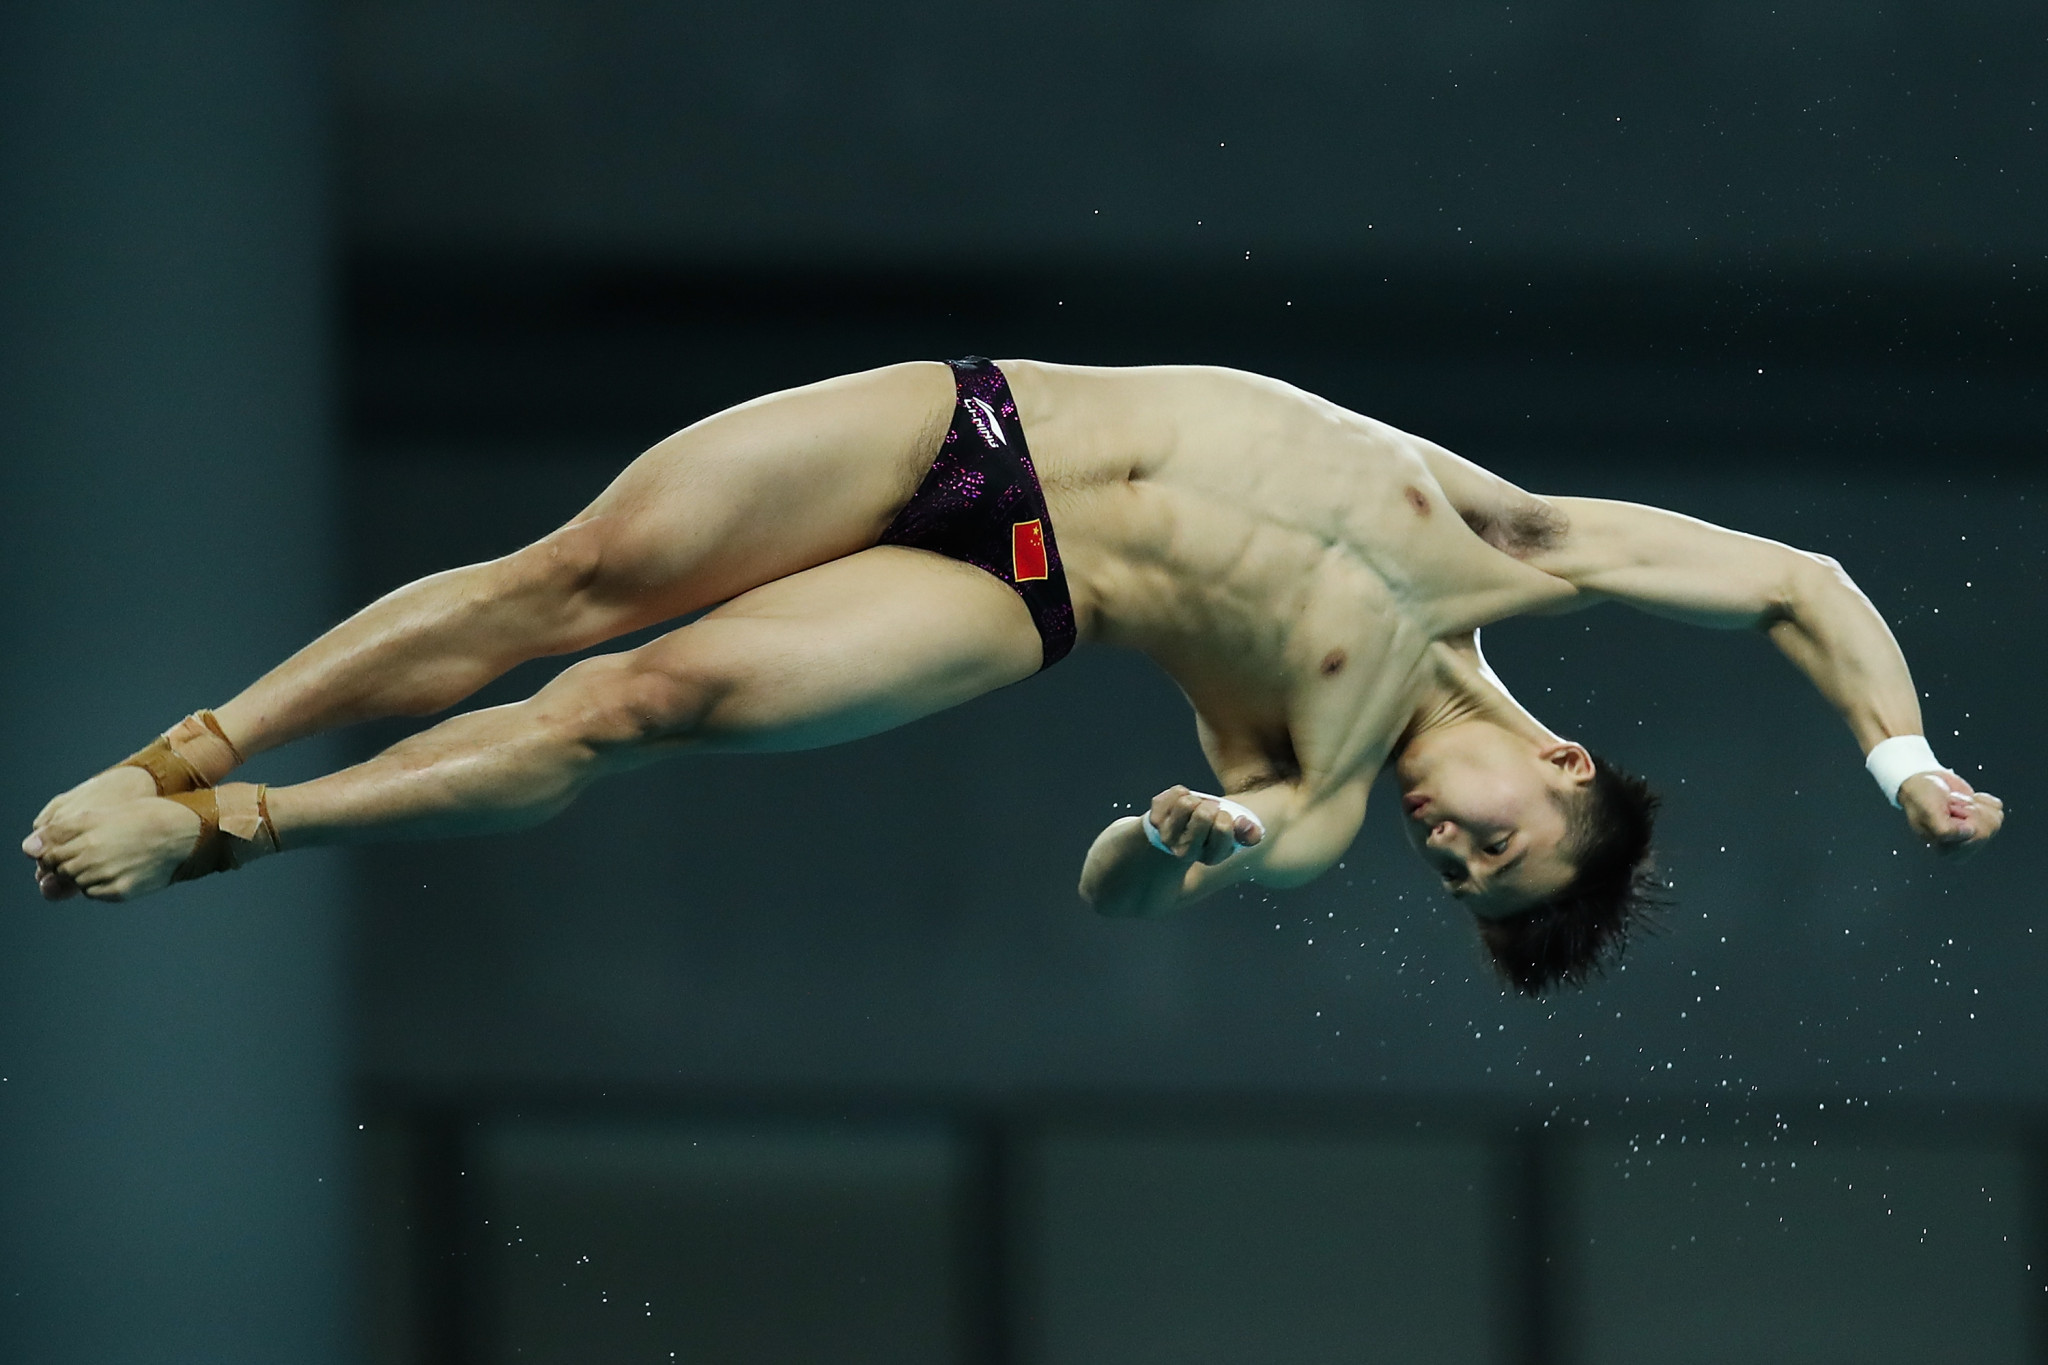 Hosts China eye success at opening Diving World Series event in Beijing